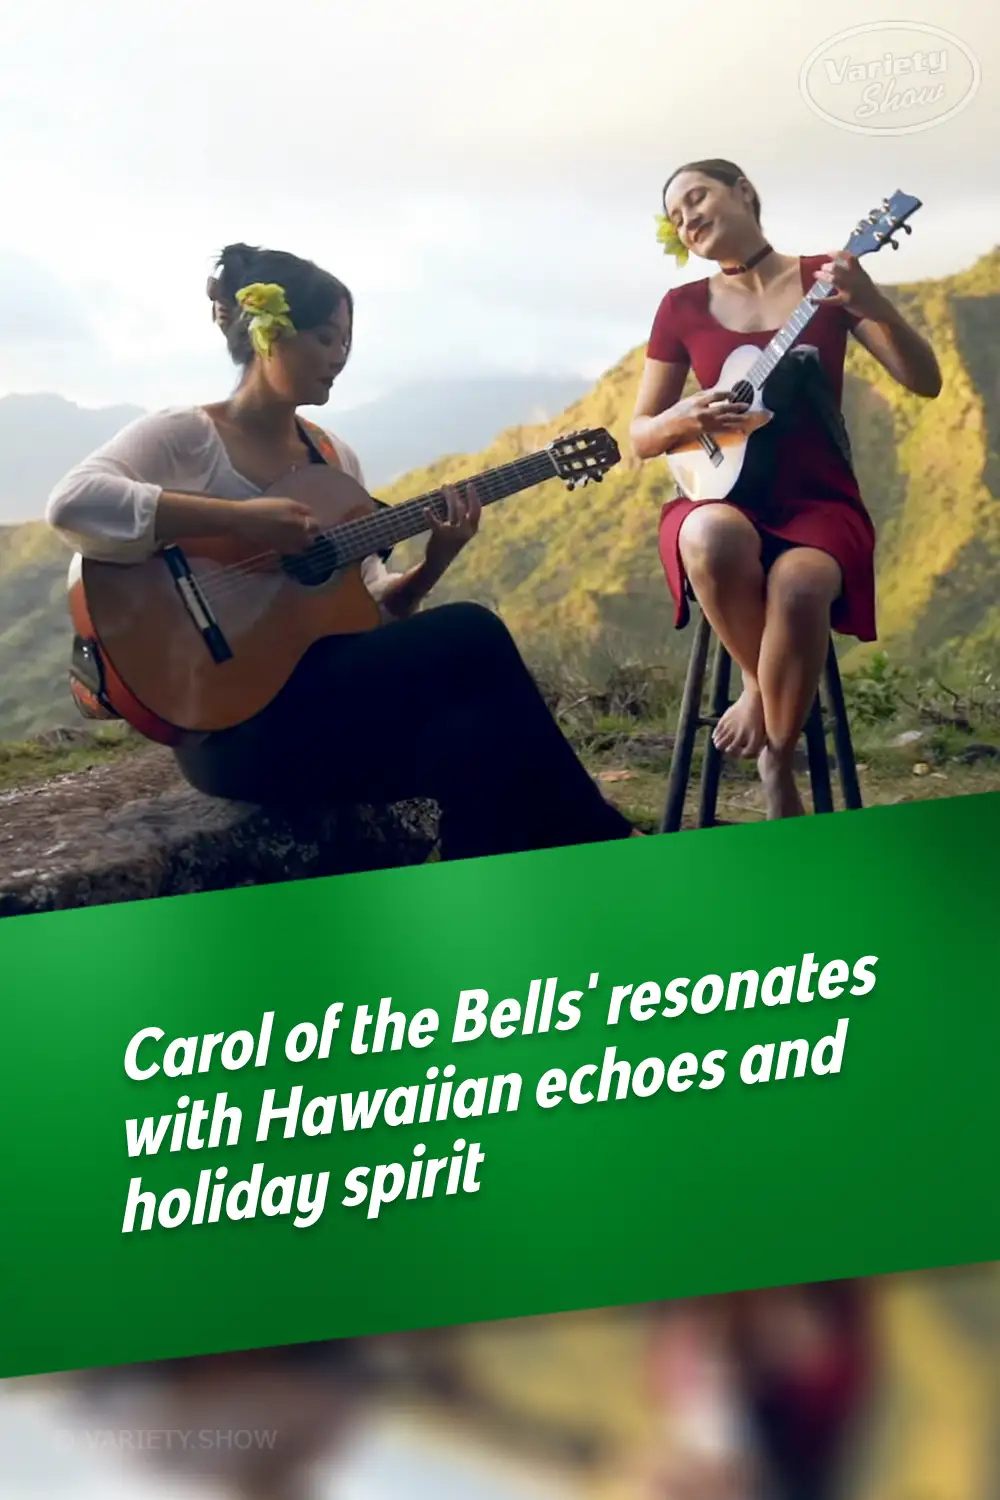 Carol of the Bells\' resonates with Hawaiian echoes and holiday spirit